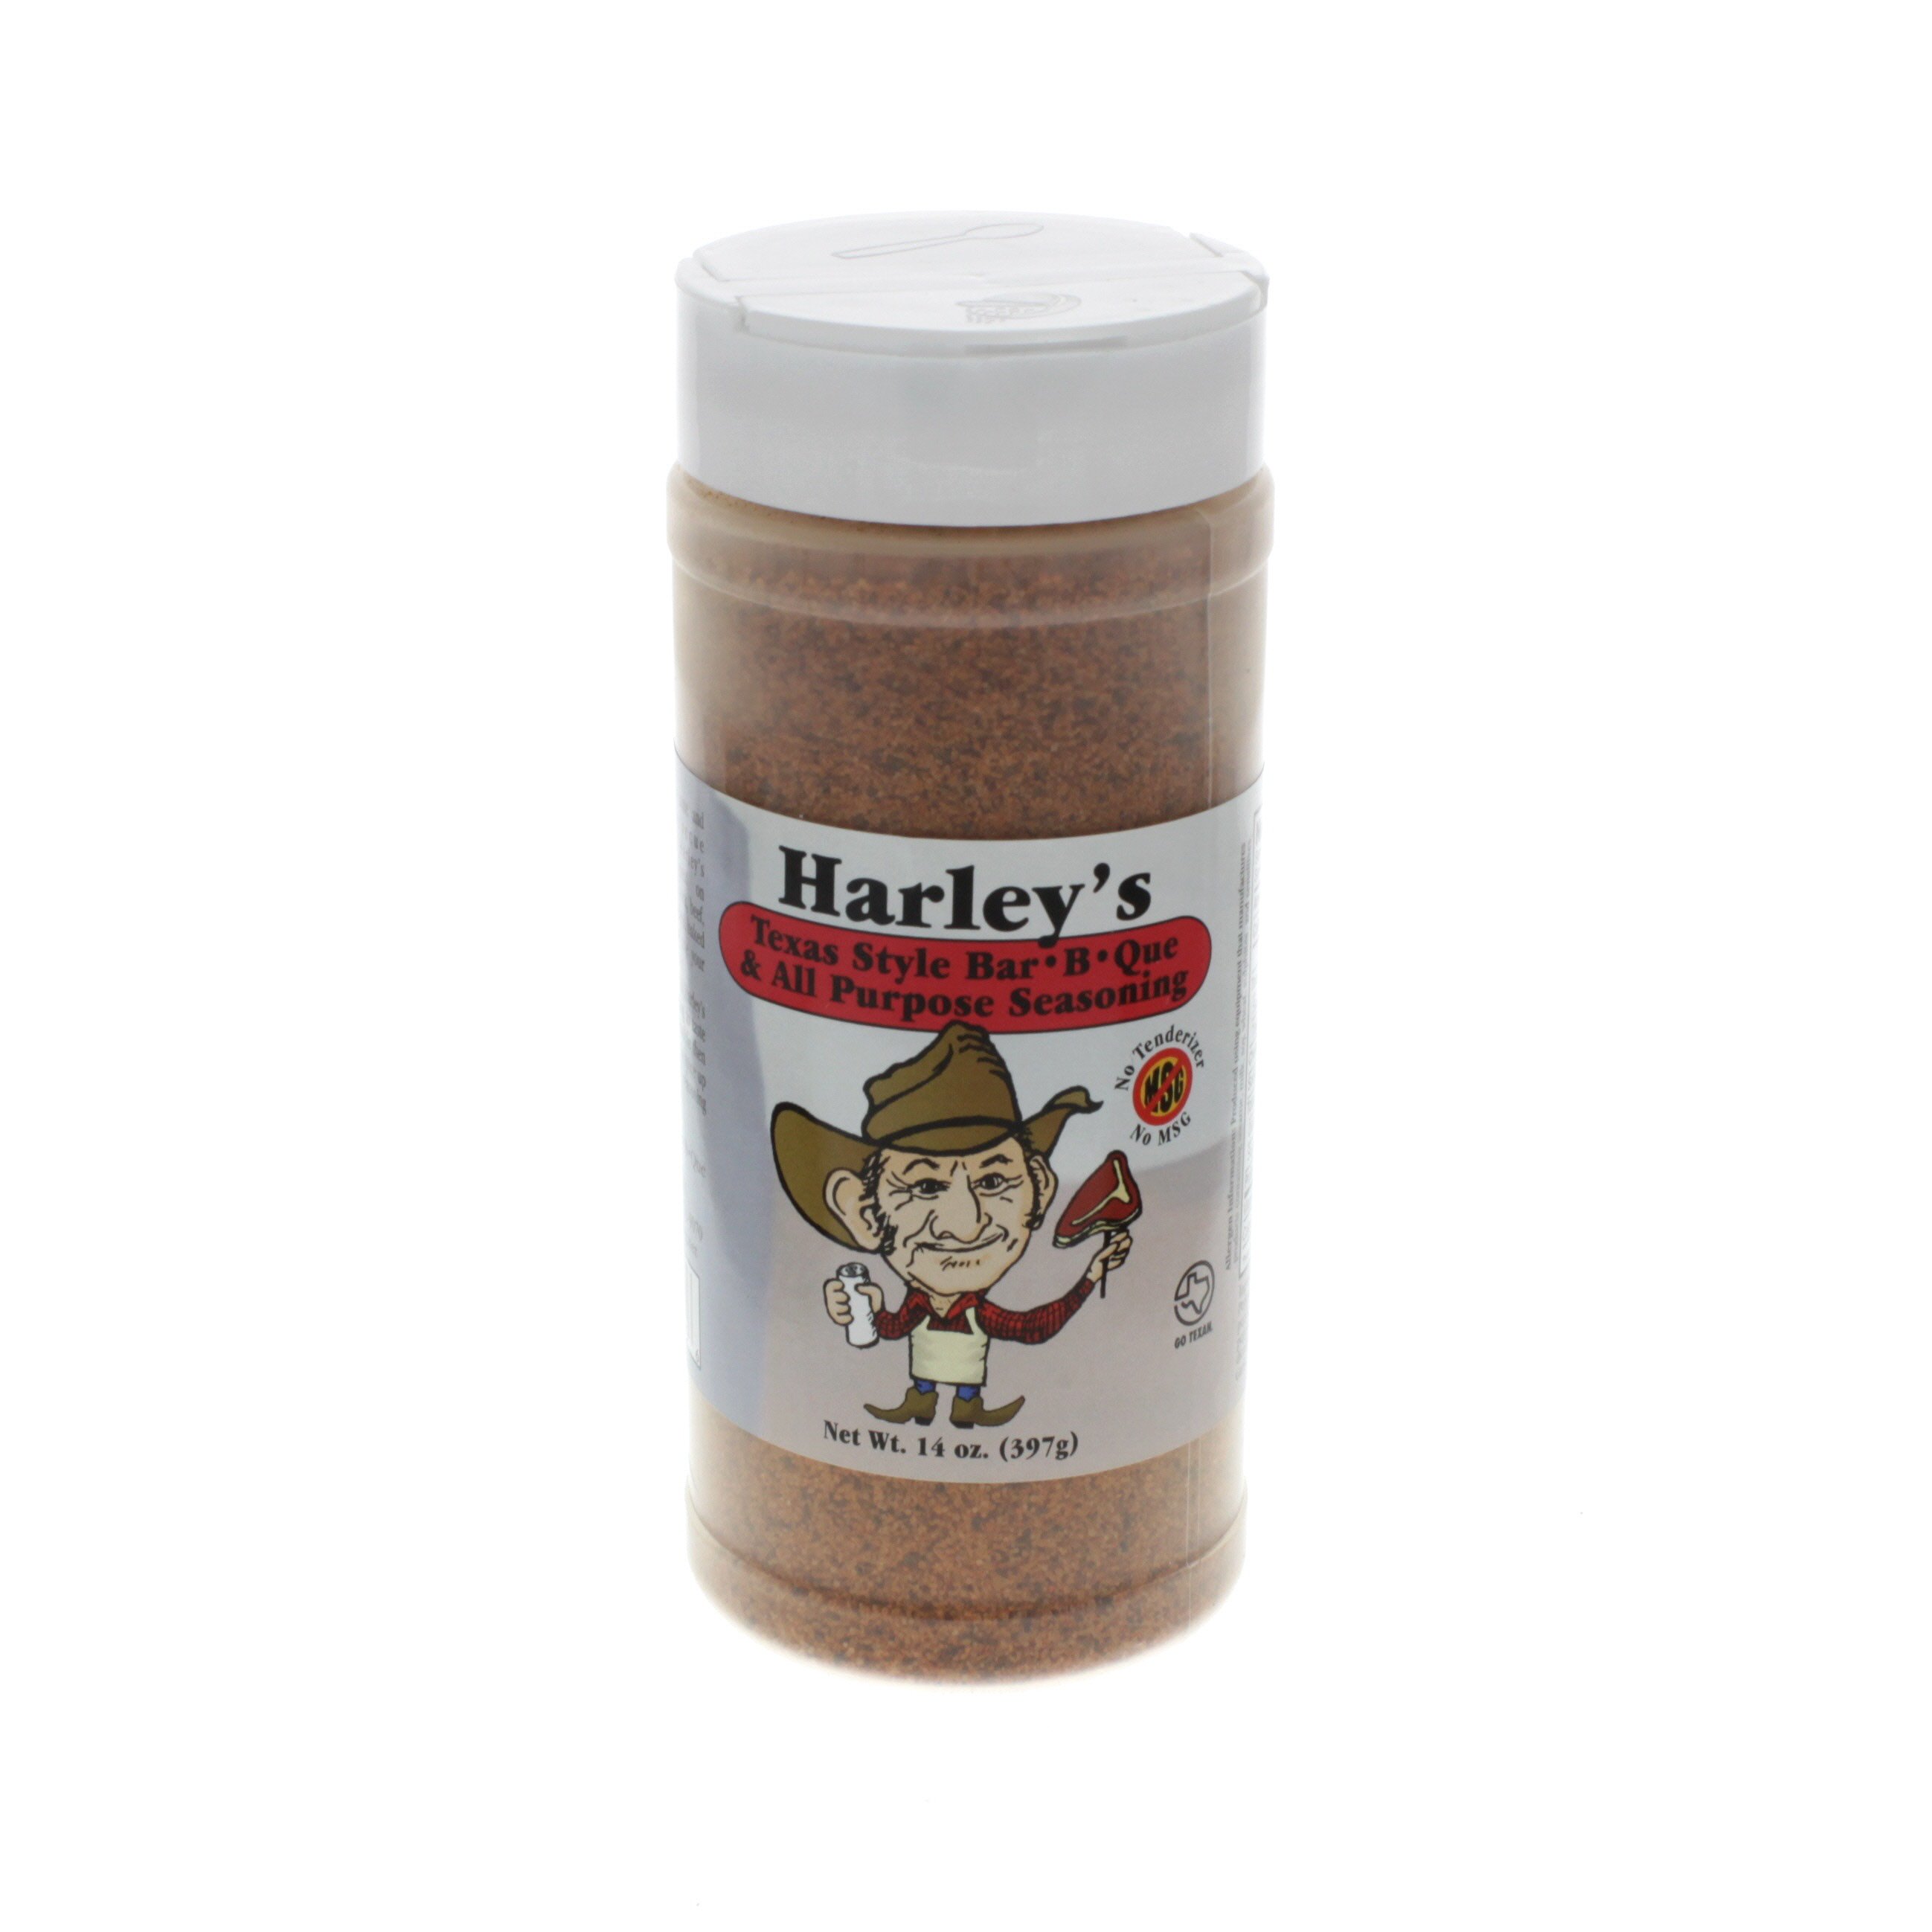 Harley S No Msg All Purpose Seasoning Shop Spice Mixes At H E B,When Are Figs In Season In Virginia